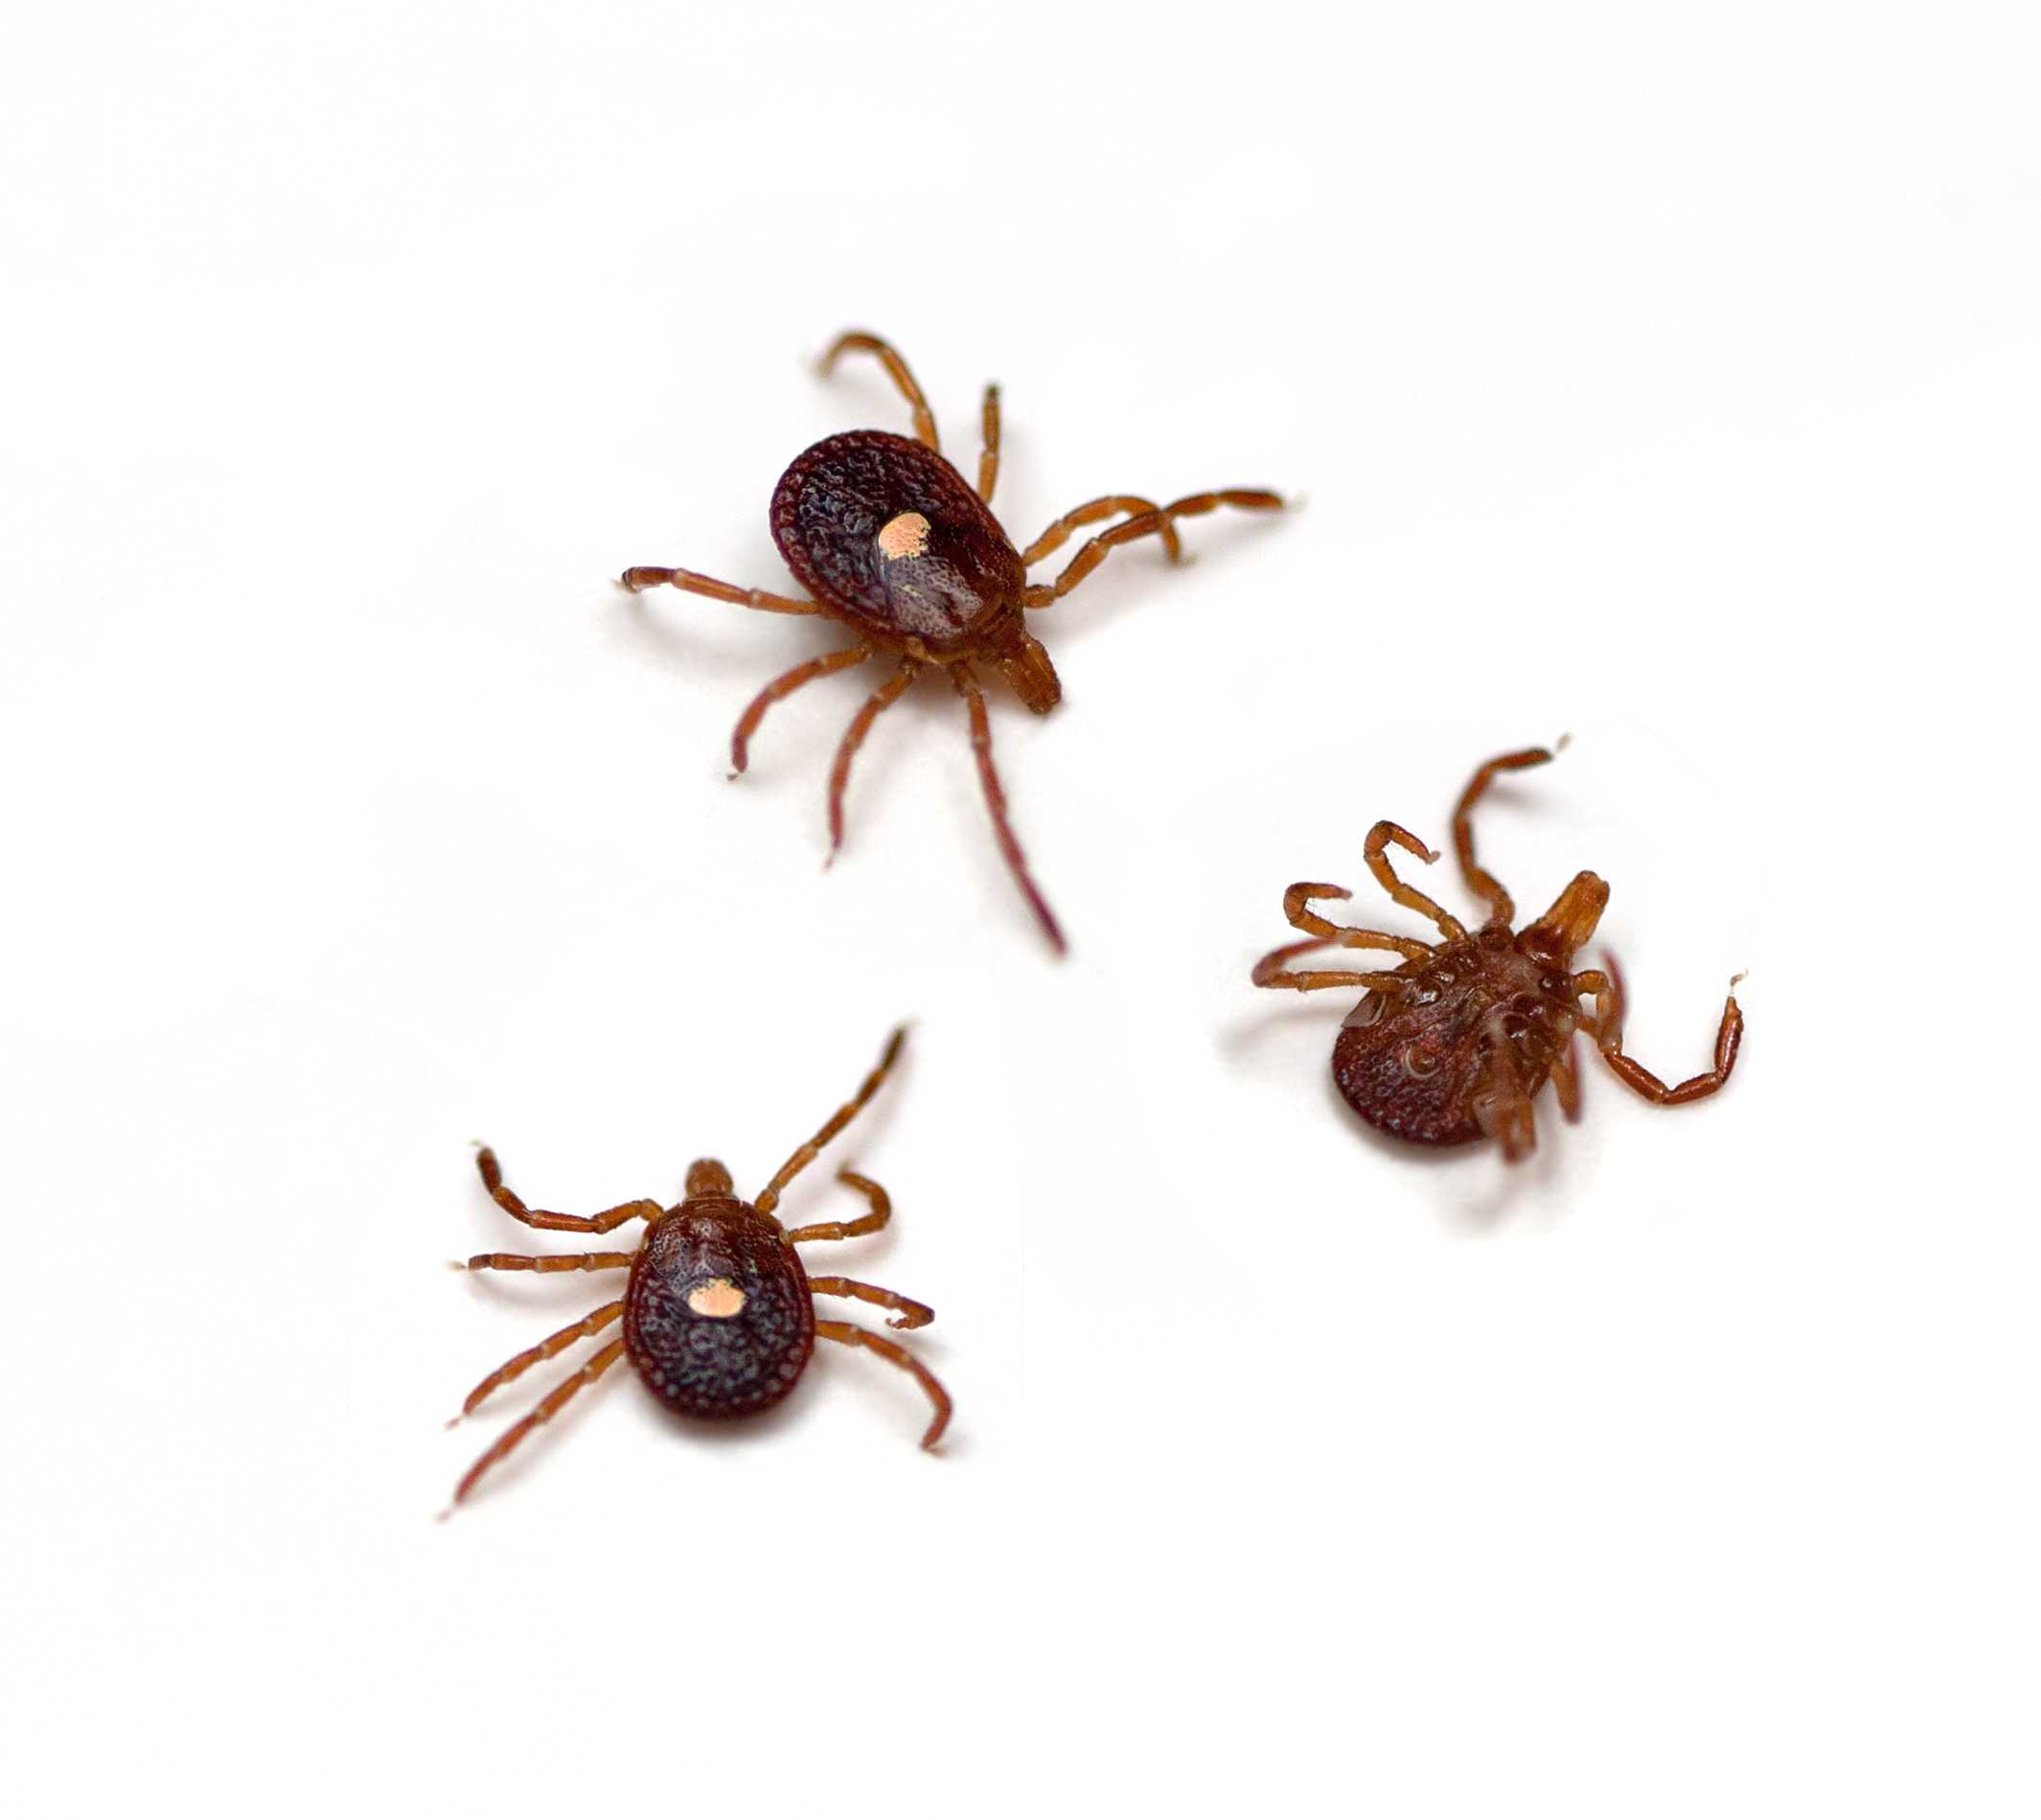 New Tick Is Making People Allergic to Red Meat - Washingtonian